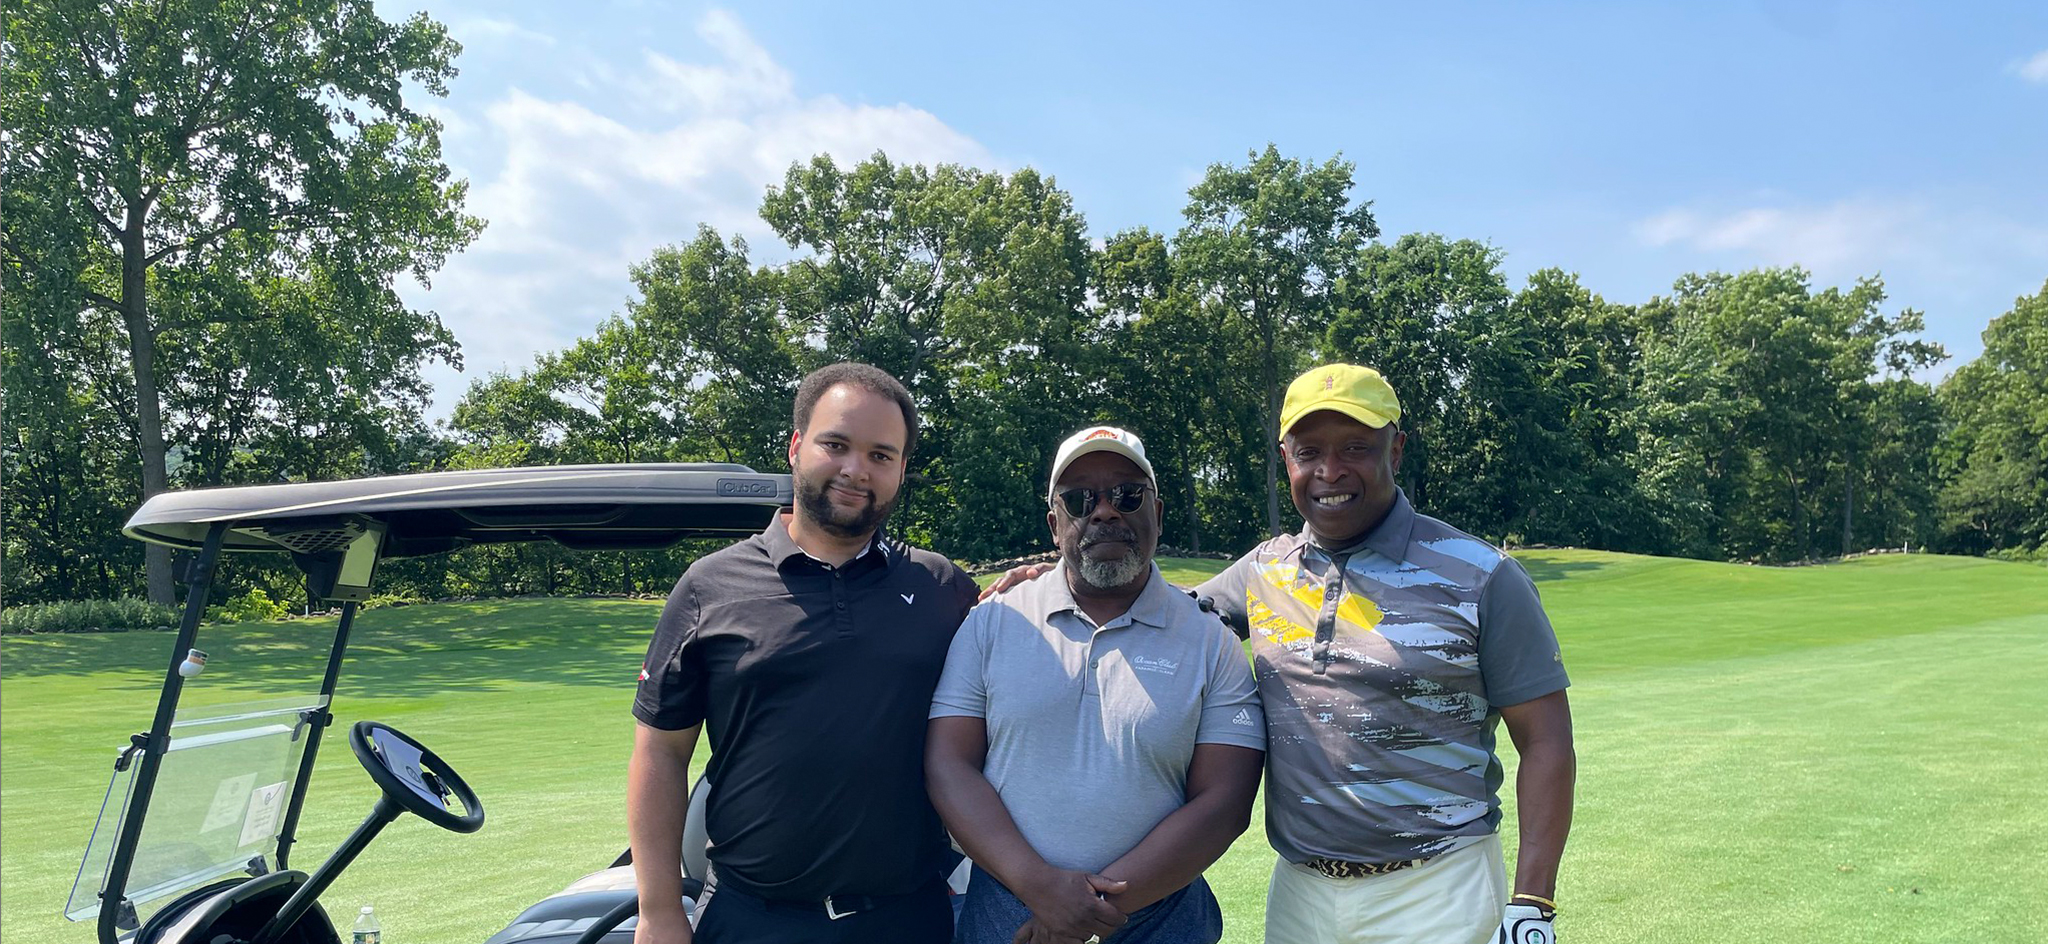 View photos of the golf outing that benefits student scholarships and other initiatives at NYMC »